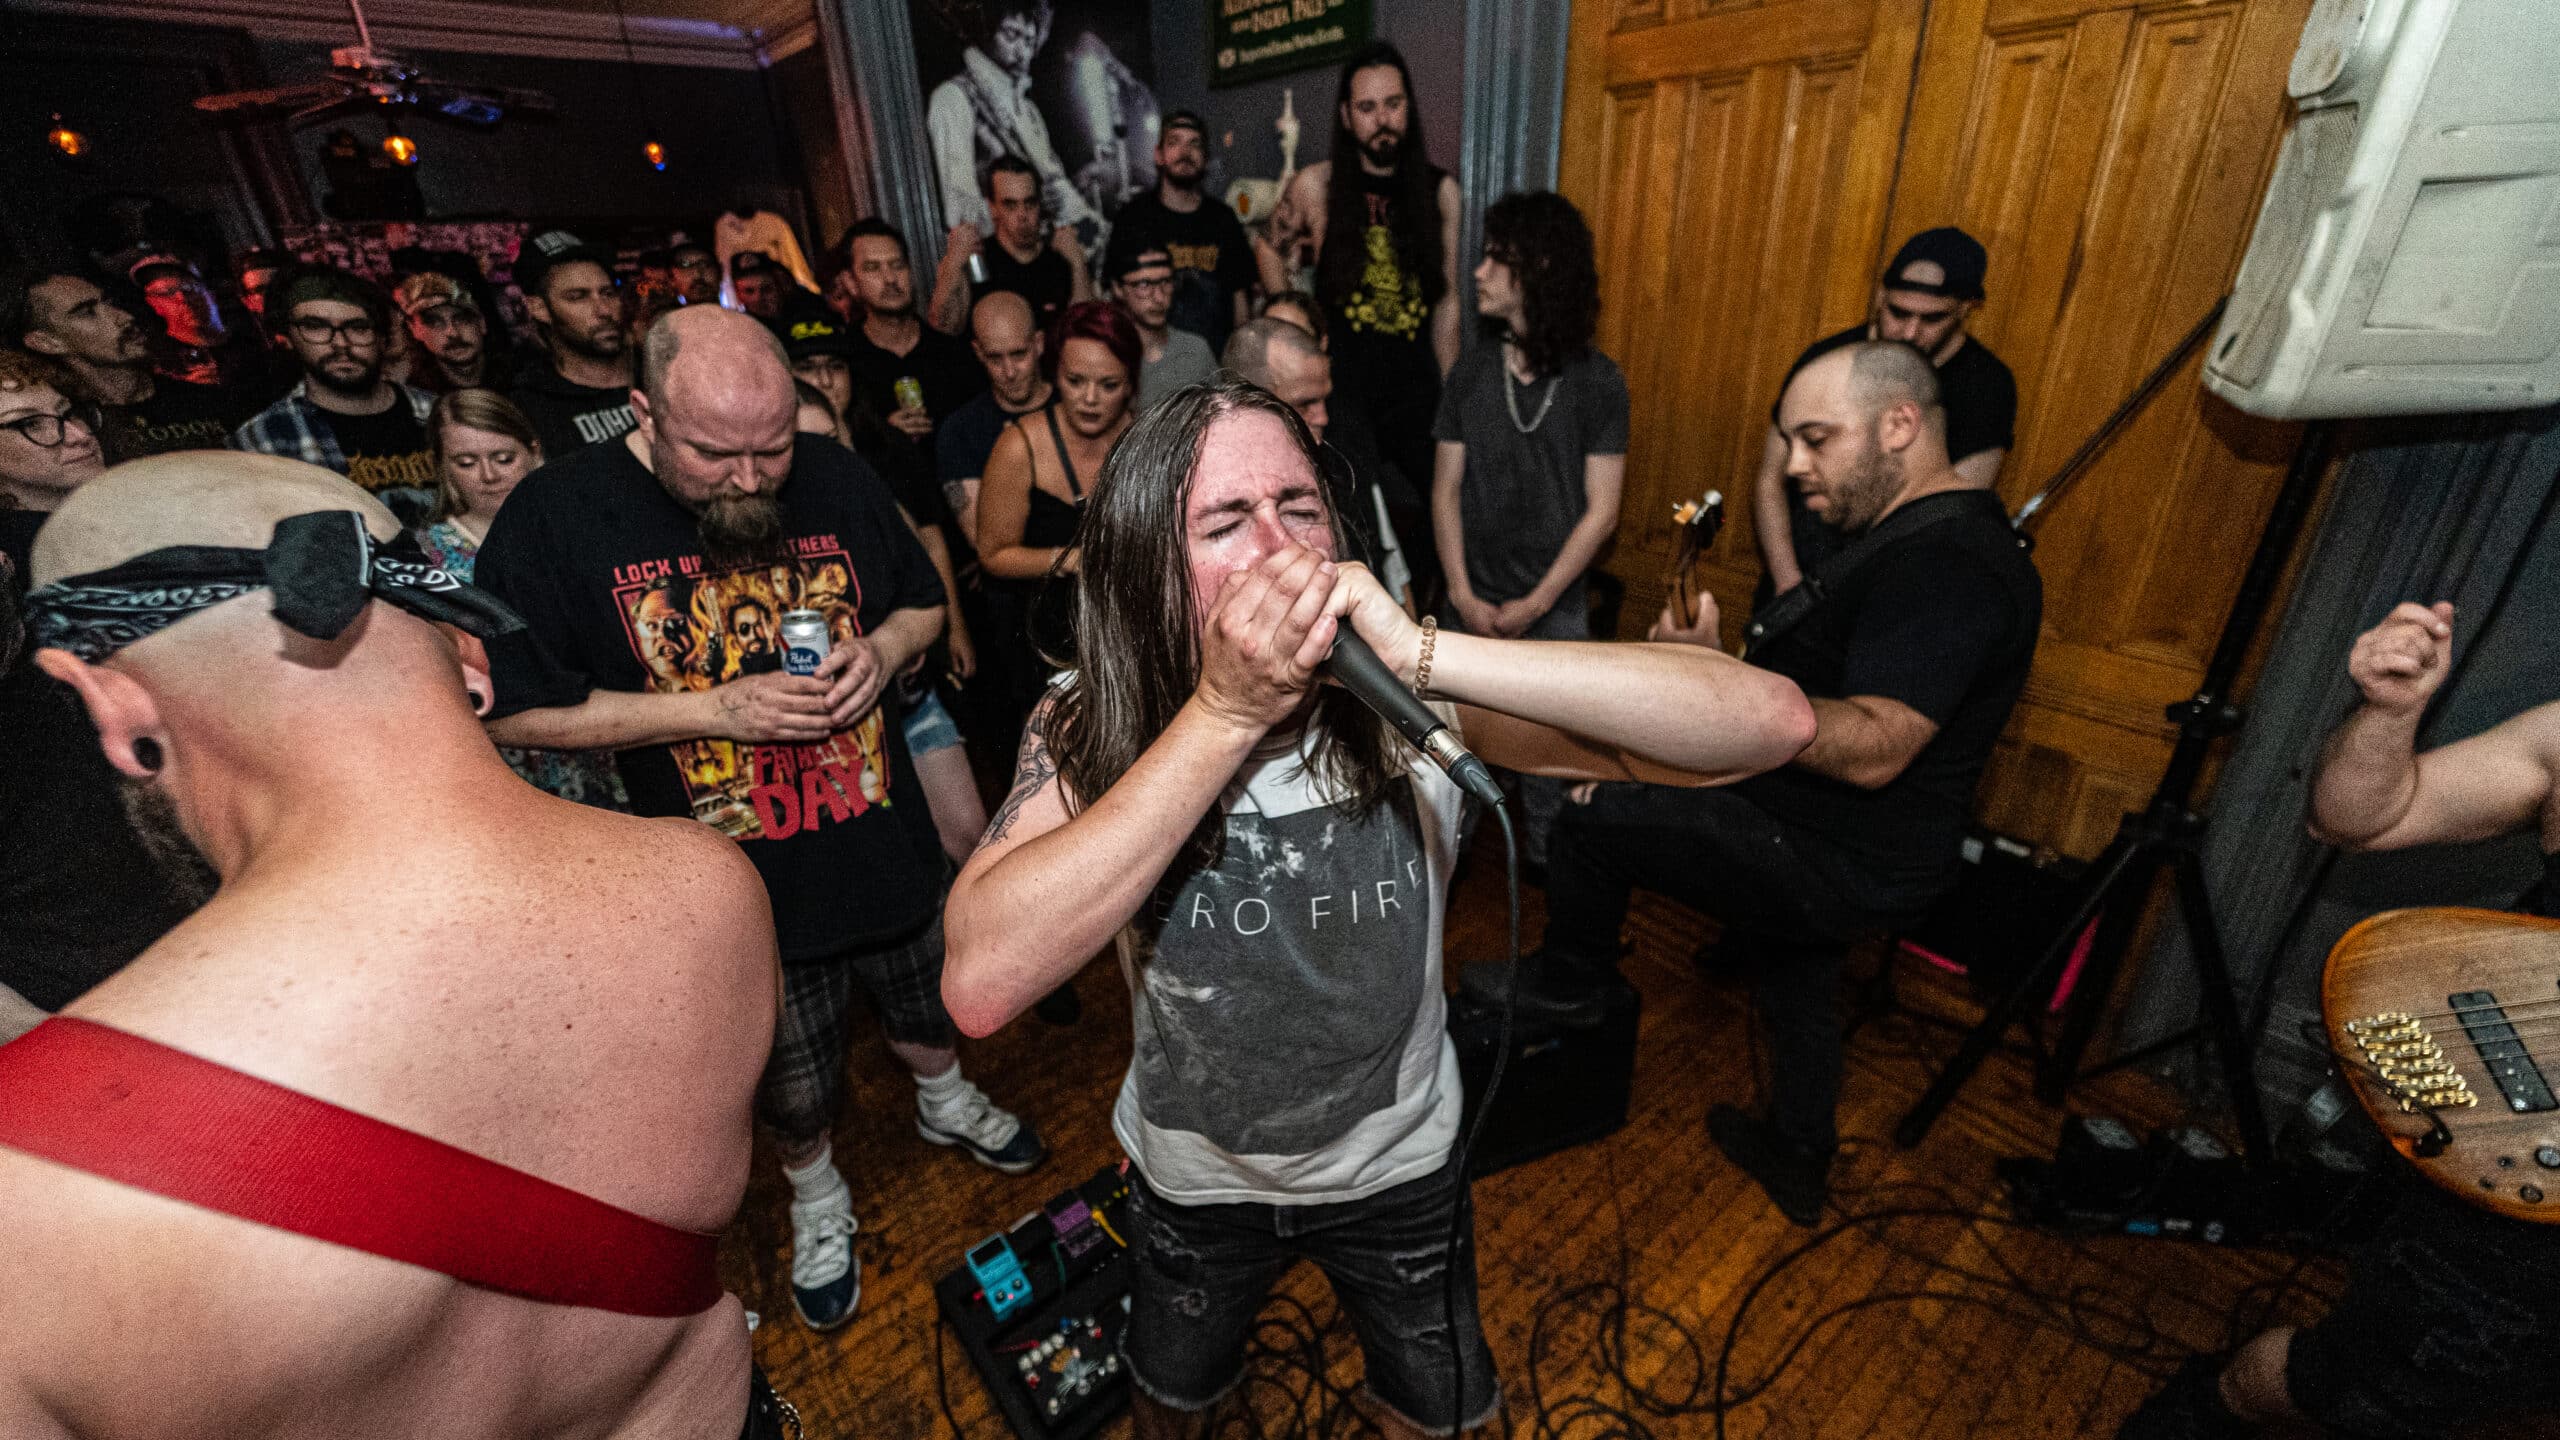 Absorb’s Album Release Show with Loversteeth, Itus and Greber